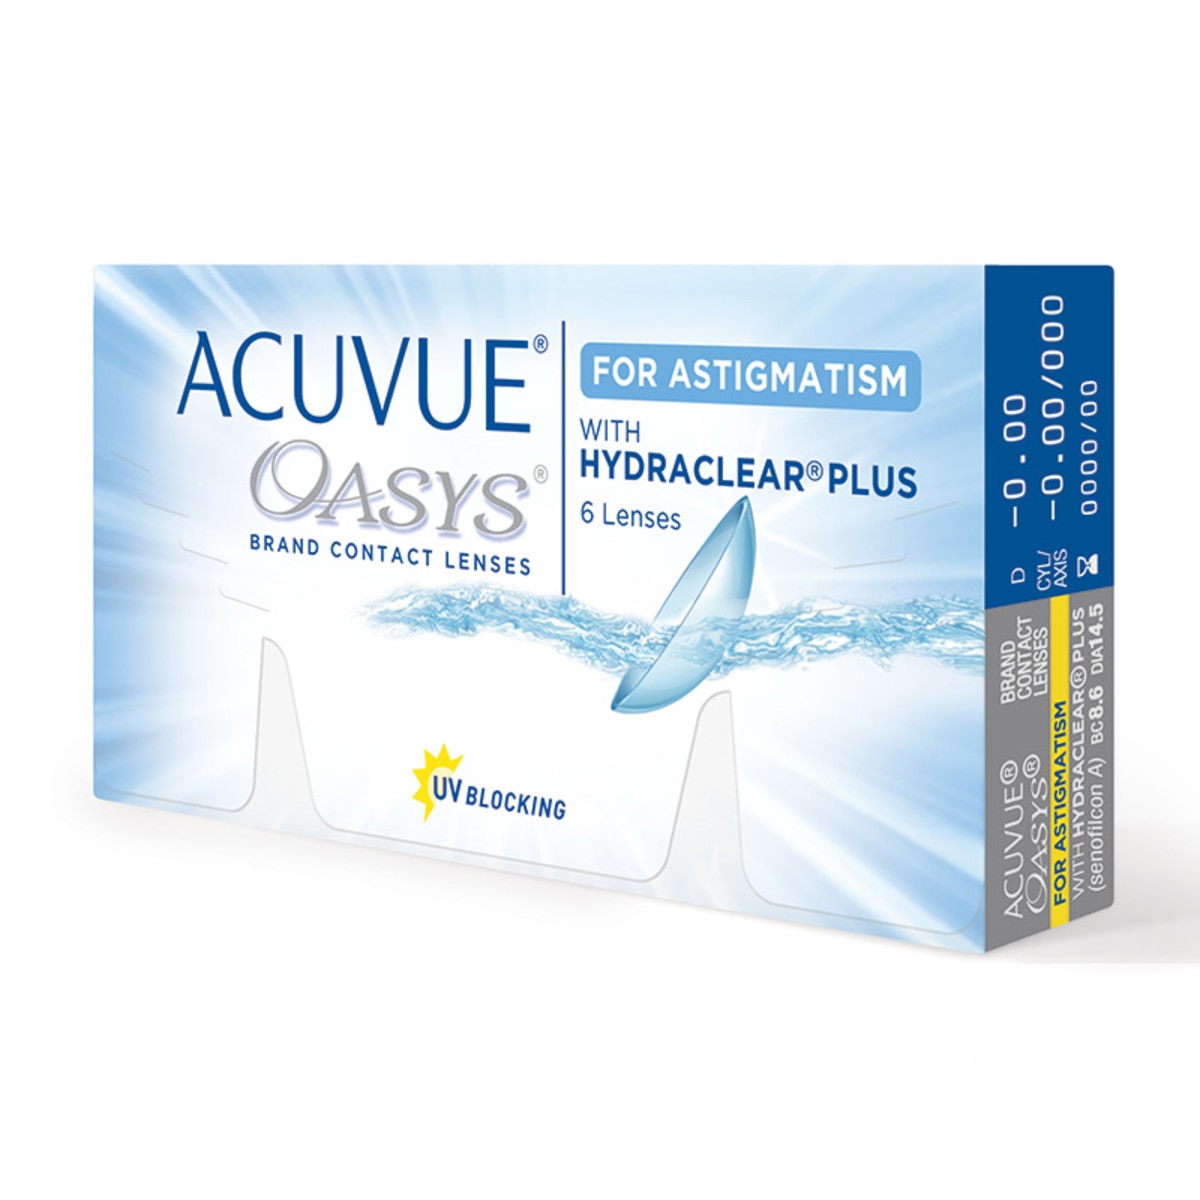 ACUVUE OASYS® con HYDRACLEAR Plus® para Astigmatismo (D -0.5, Cyl/Axis -1.75/120)